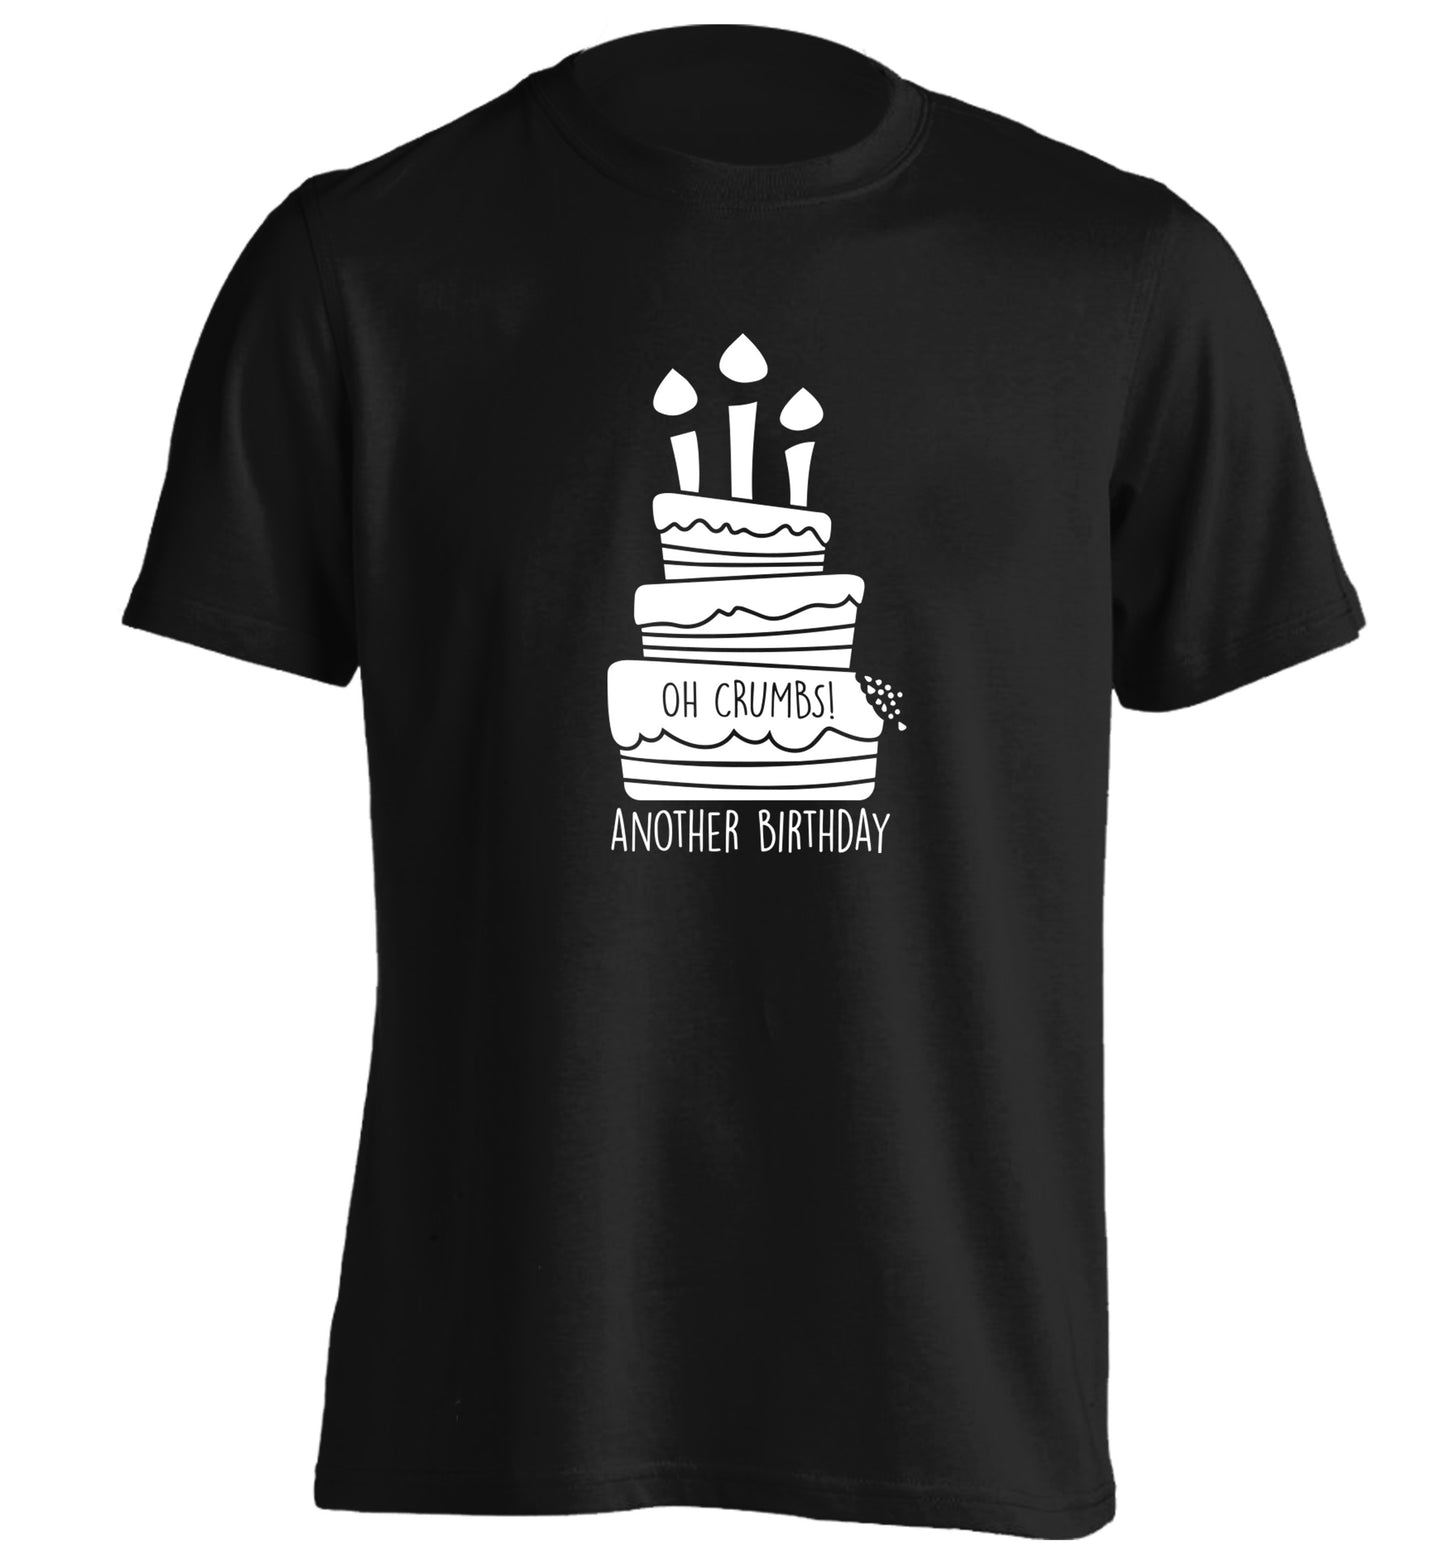 Oh crumbs another birthday! adults unisex black Tshirt 2XL